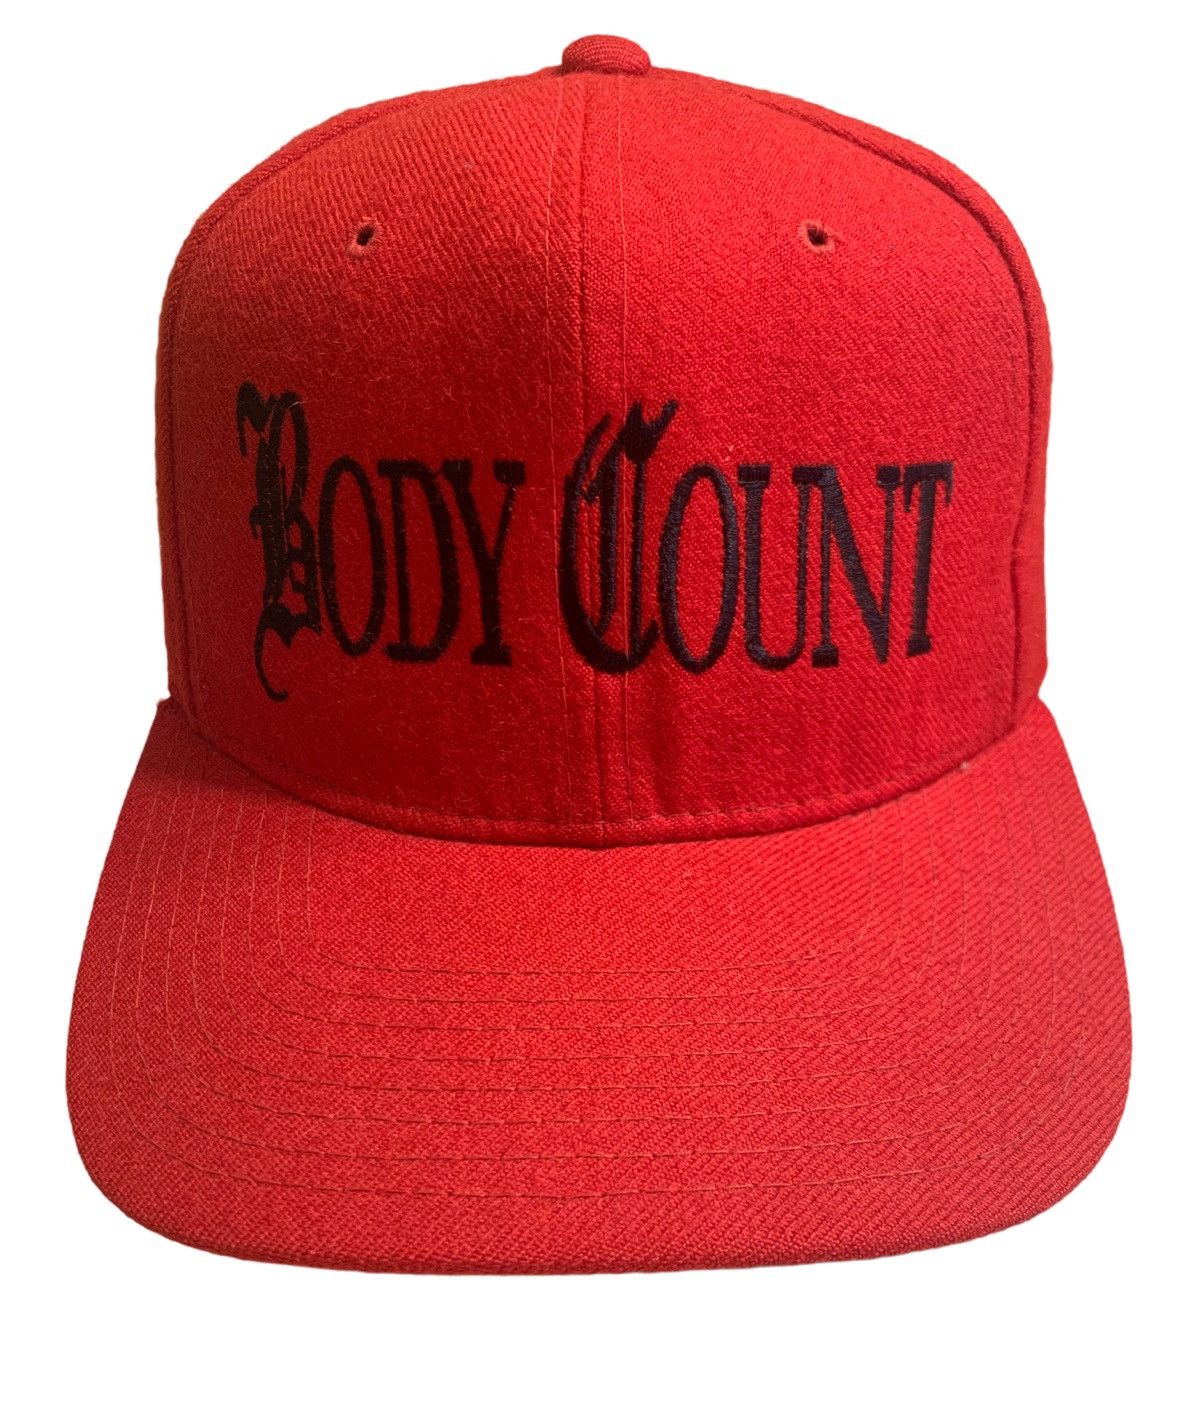 Vintage Body Count Band Promo Syndicate x New Era Snapback Vintage Size ONE SIZE - 2 Preview